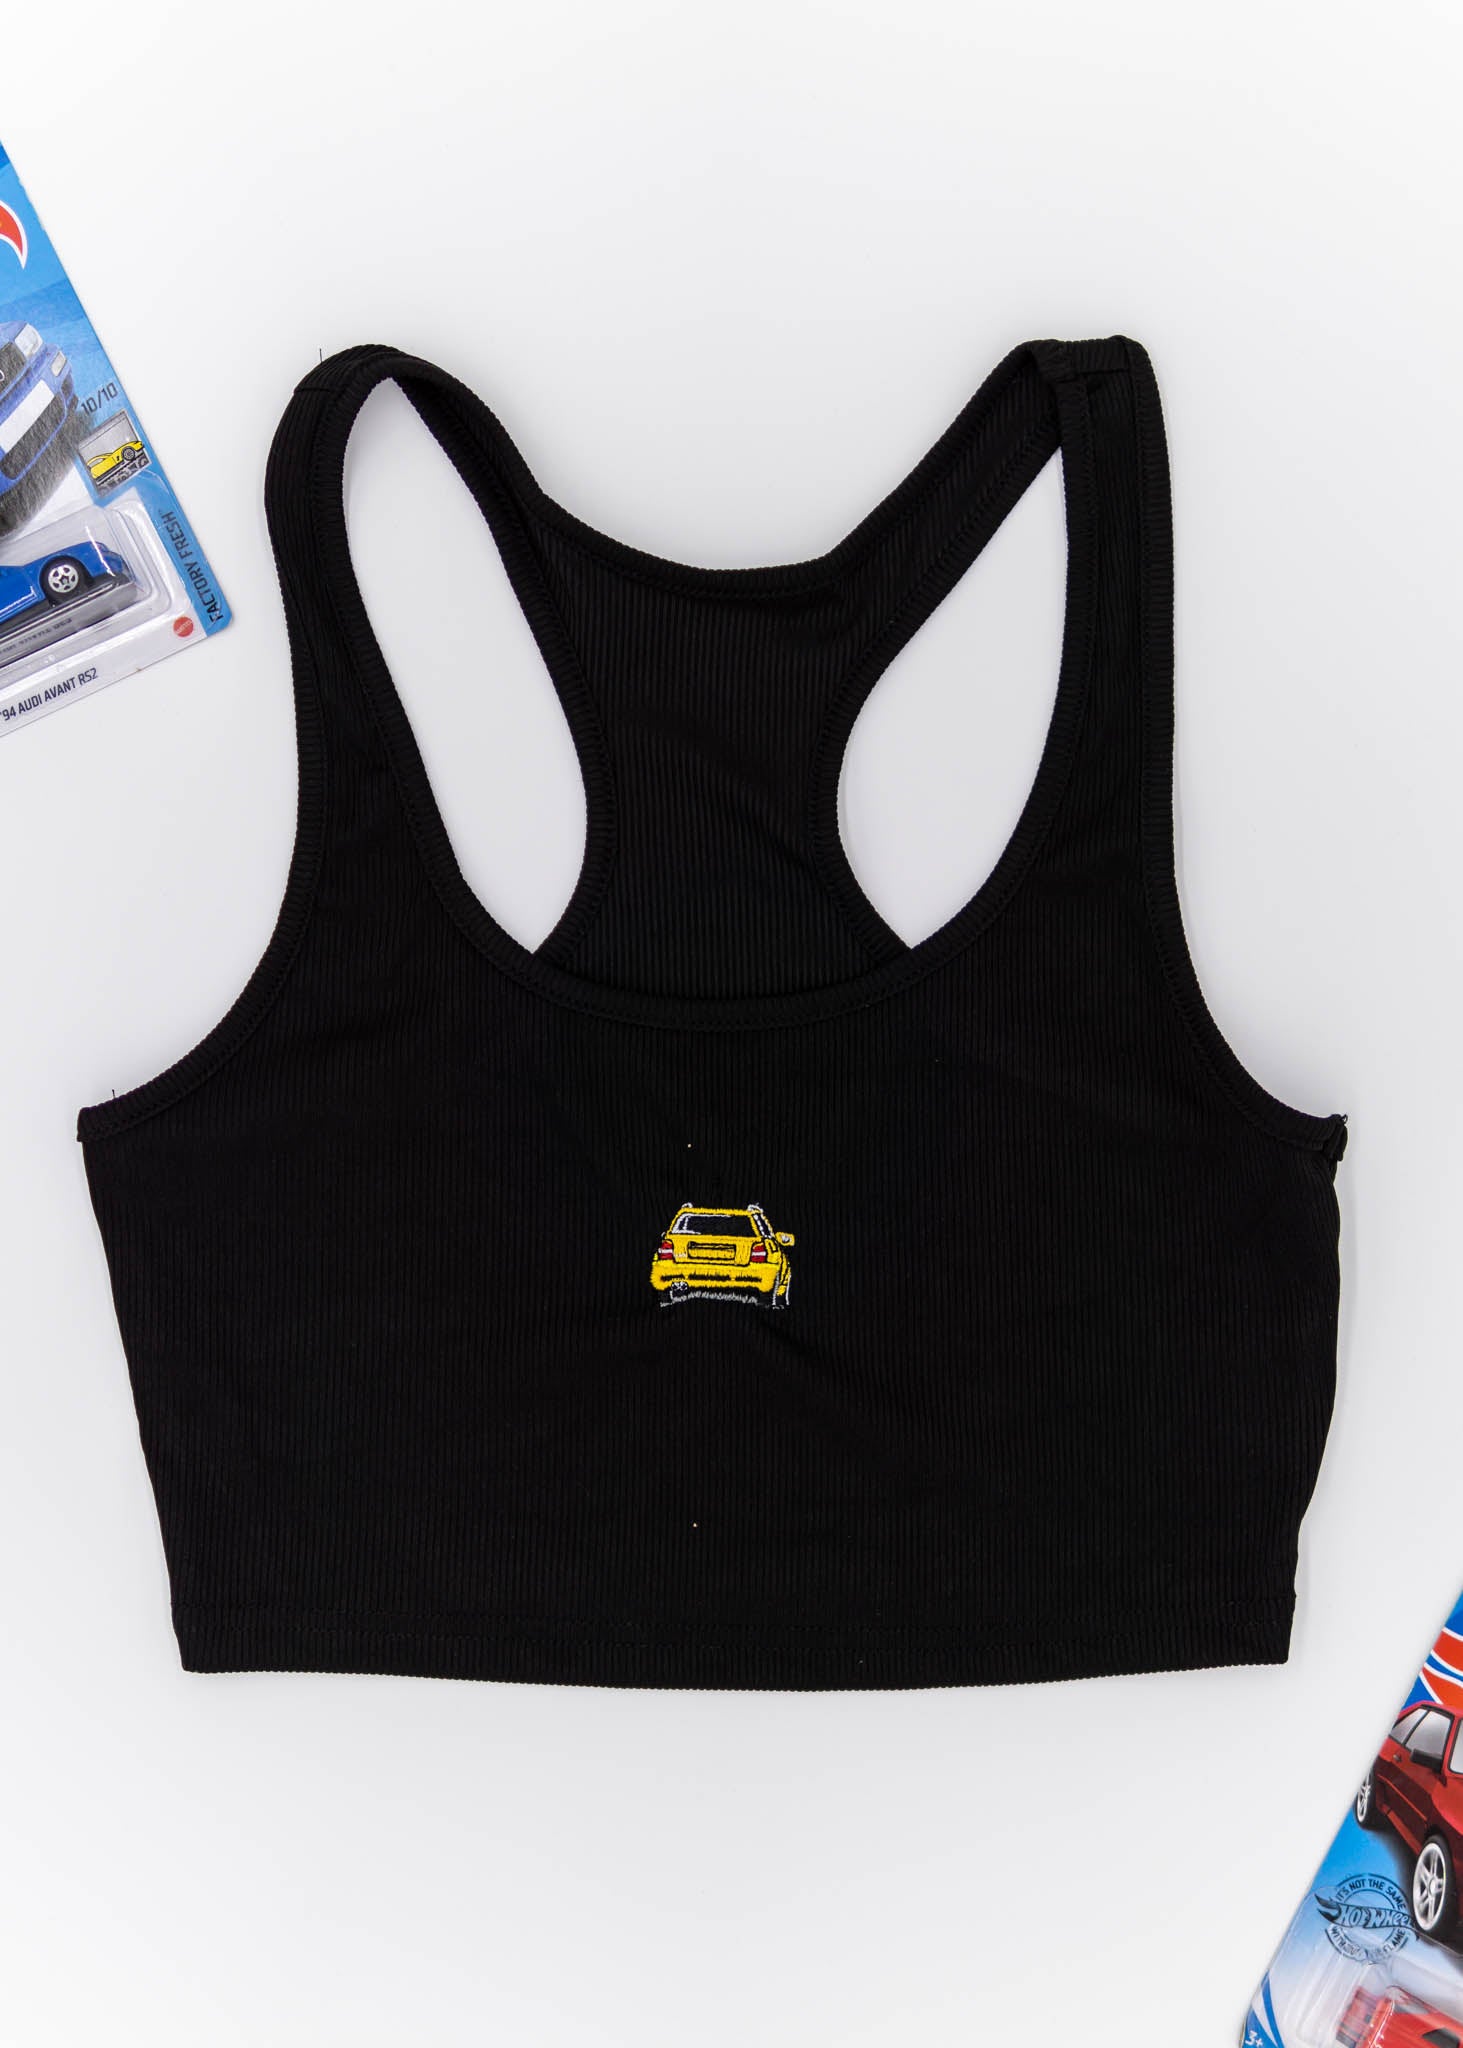 A black Audi crop top for women. Photo is a front view of the top with an embroidered imola yellow Audi B5 RS4. Fabric composition is polyester, and elastine. The material is stretchy, ribbed, and non-transparent. The style of this shirt is sleeveless, with a crewneck neckline.